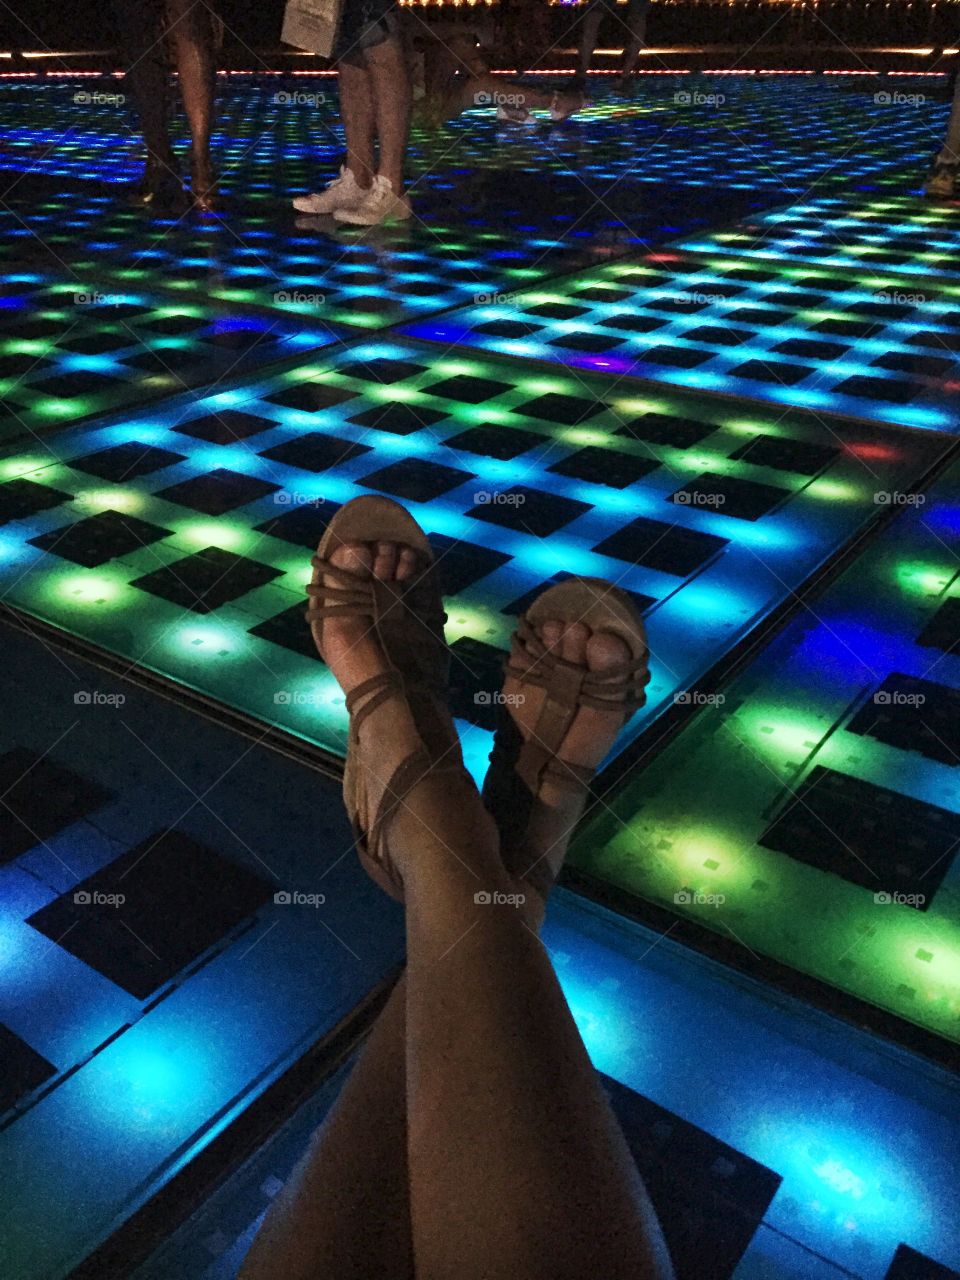 At night in Zadar, Croatia, this floor in the city lights up with the dancing colors from the sun's energy of the previous day. It is such a fun place to sit and finish the day, watching as others gather to also enjoy it's show. 